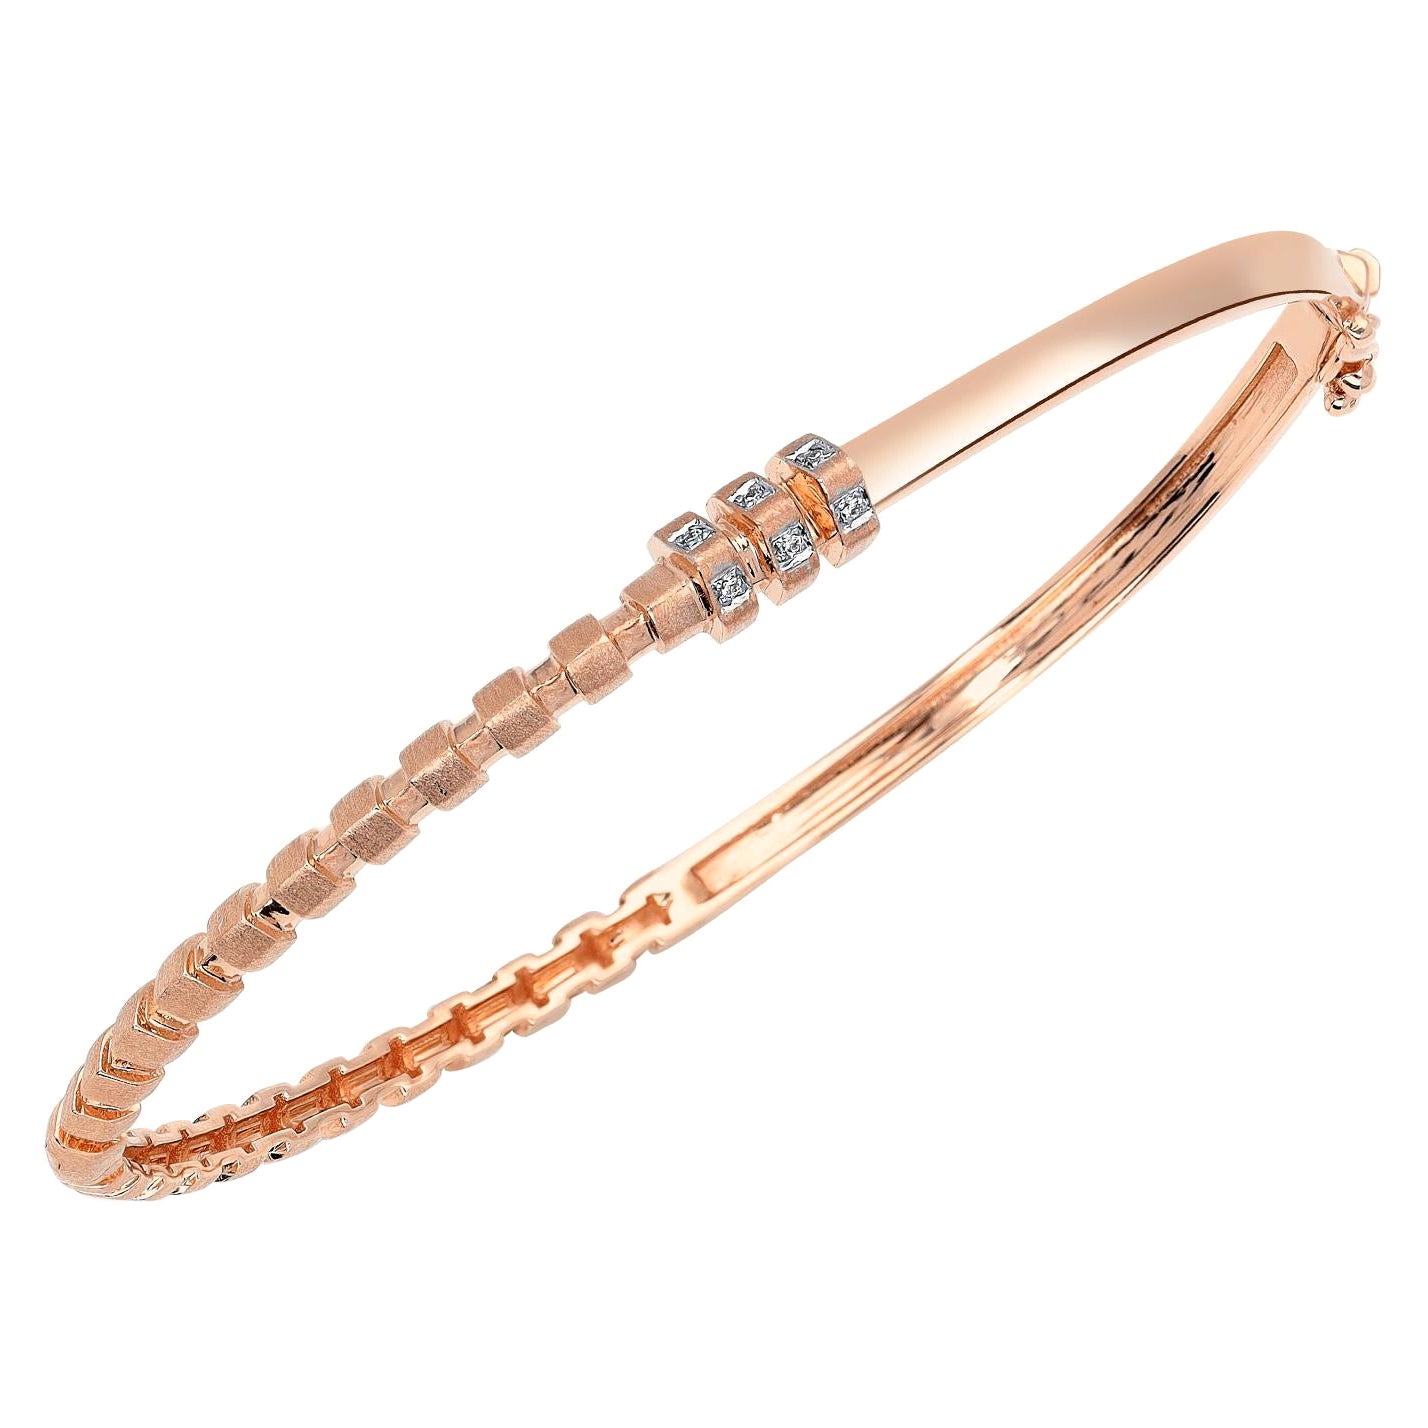 Selda Jewellery Taotie Narrow Bangle in 14K Rose Gold with 0.2ct White Diamond For Sale